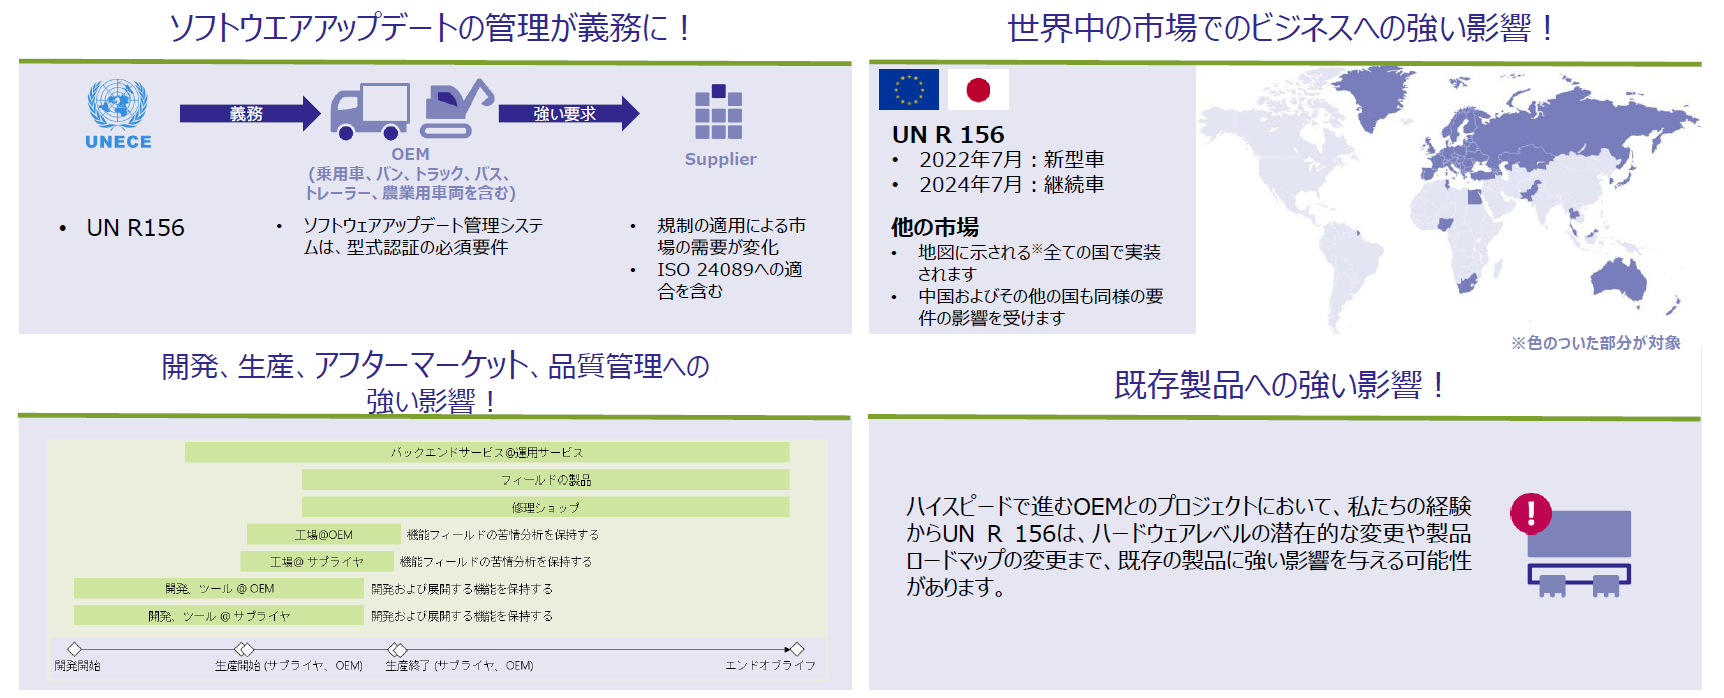 UNECE WP.29 UN-R156　ソフトウェアアップデート管理システム(SUMS)